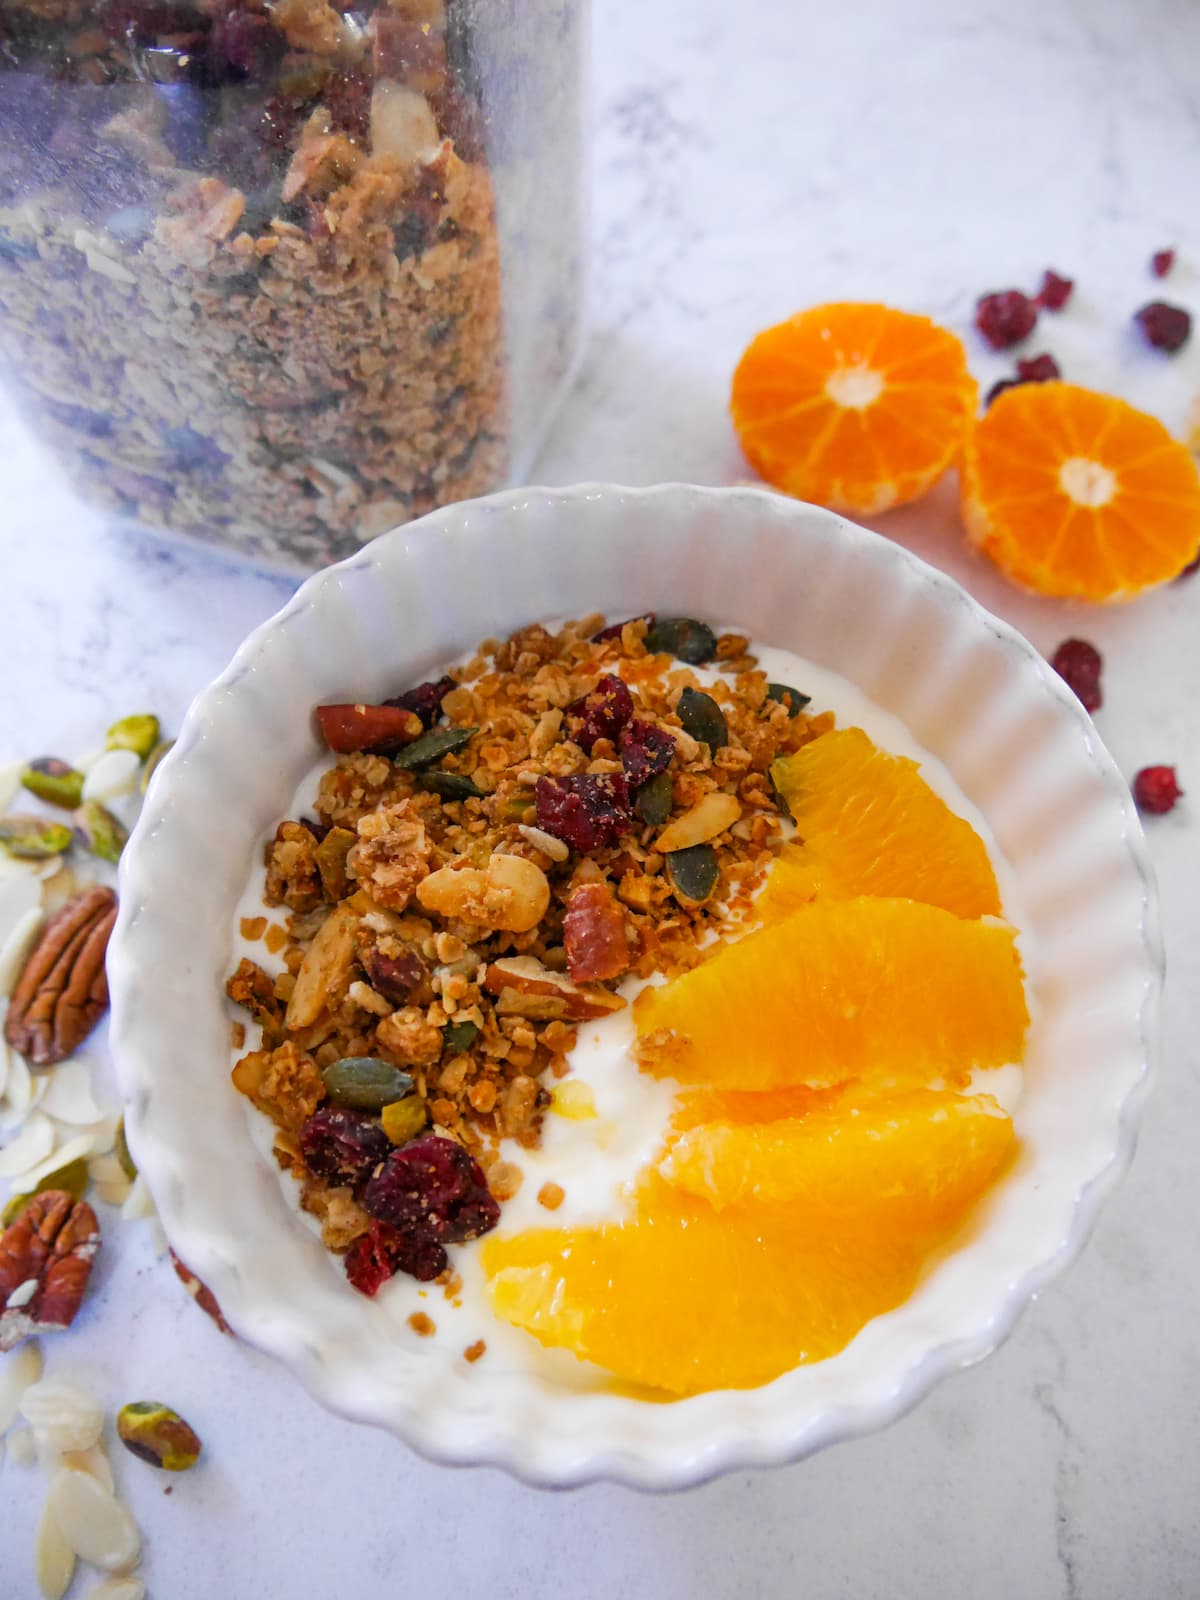 A white bowl filled with Greek yogurt topped with slices of fresh orange and Christmas spiced granola with orange and cranberries, with a jar of granola set alongside.